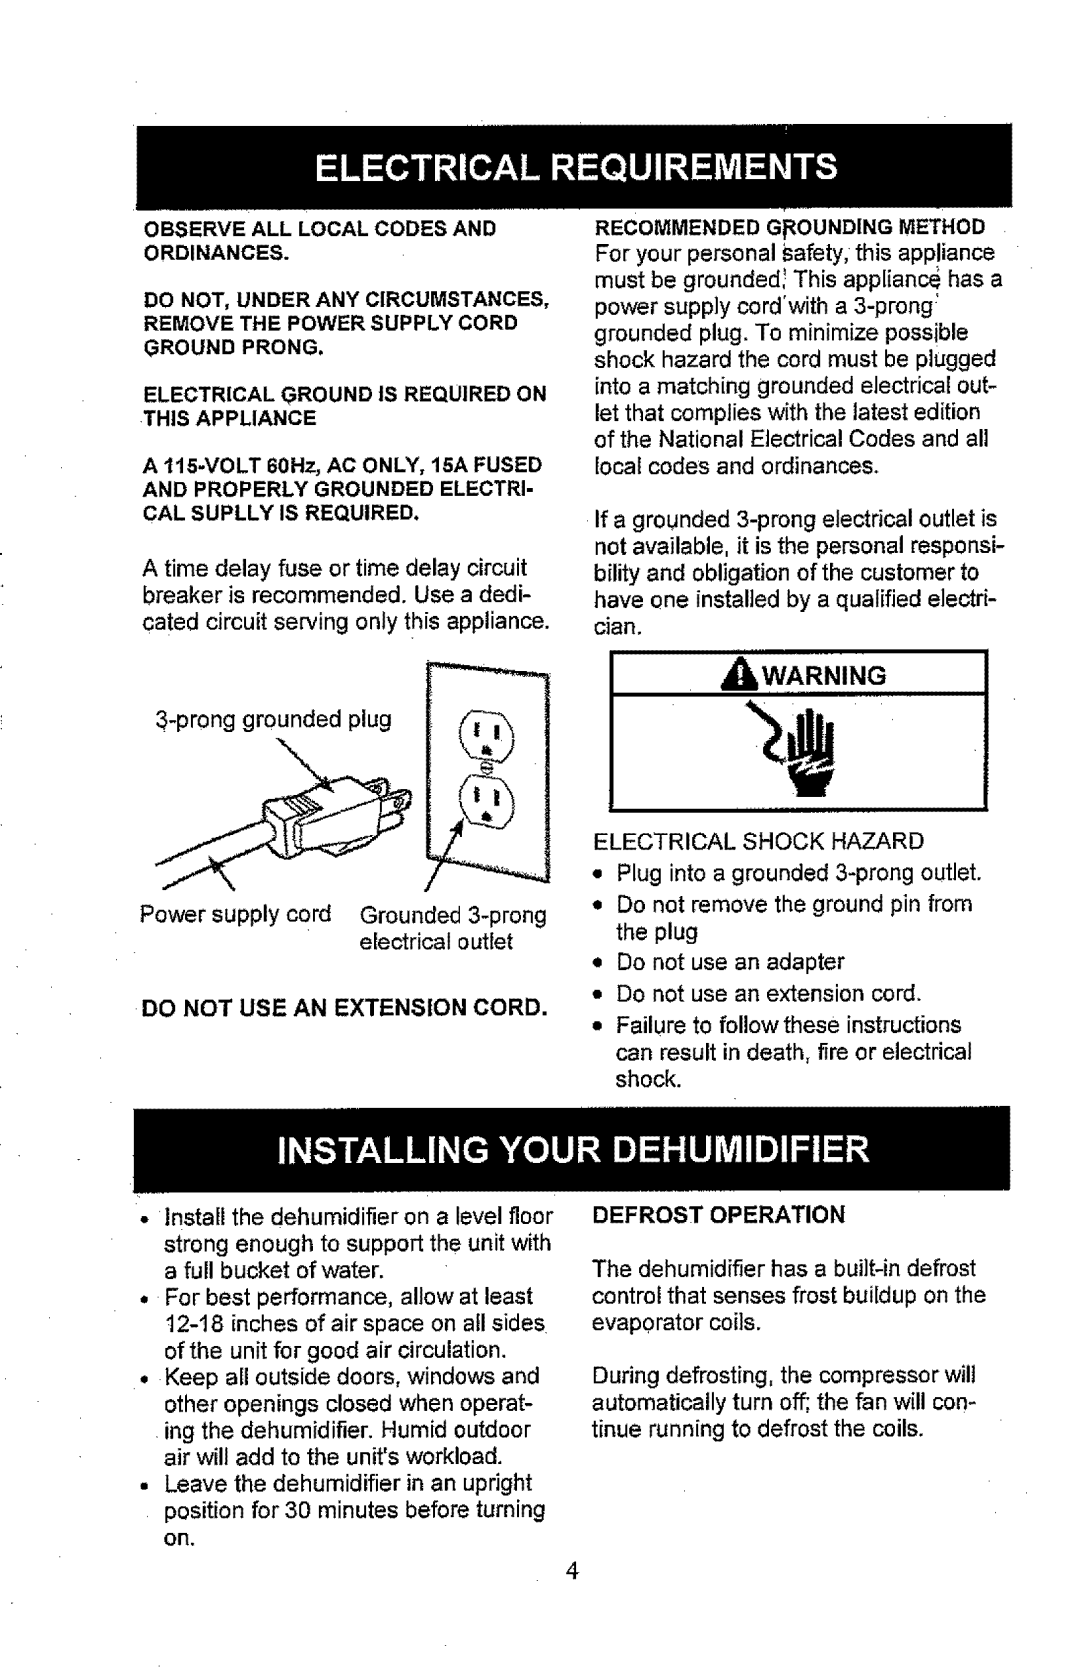 Kenmore 407.52501, 407.52701 manual Do Not Use An Extension Cord, Recommendedg Oundingmethod, power supply cordwitha 3-prong 